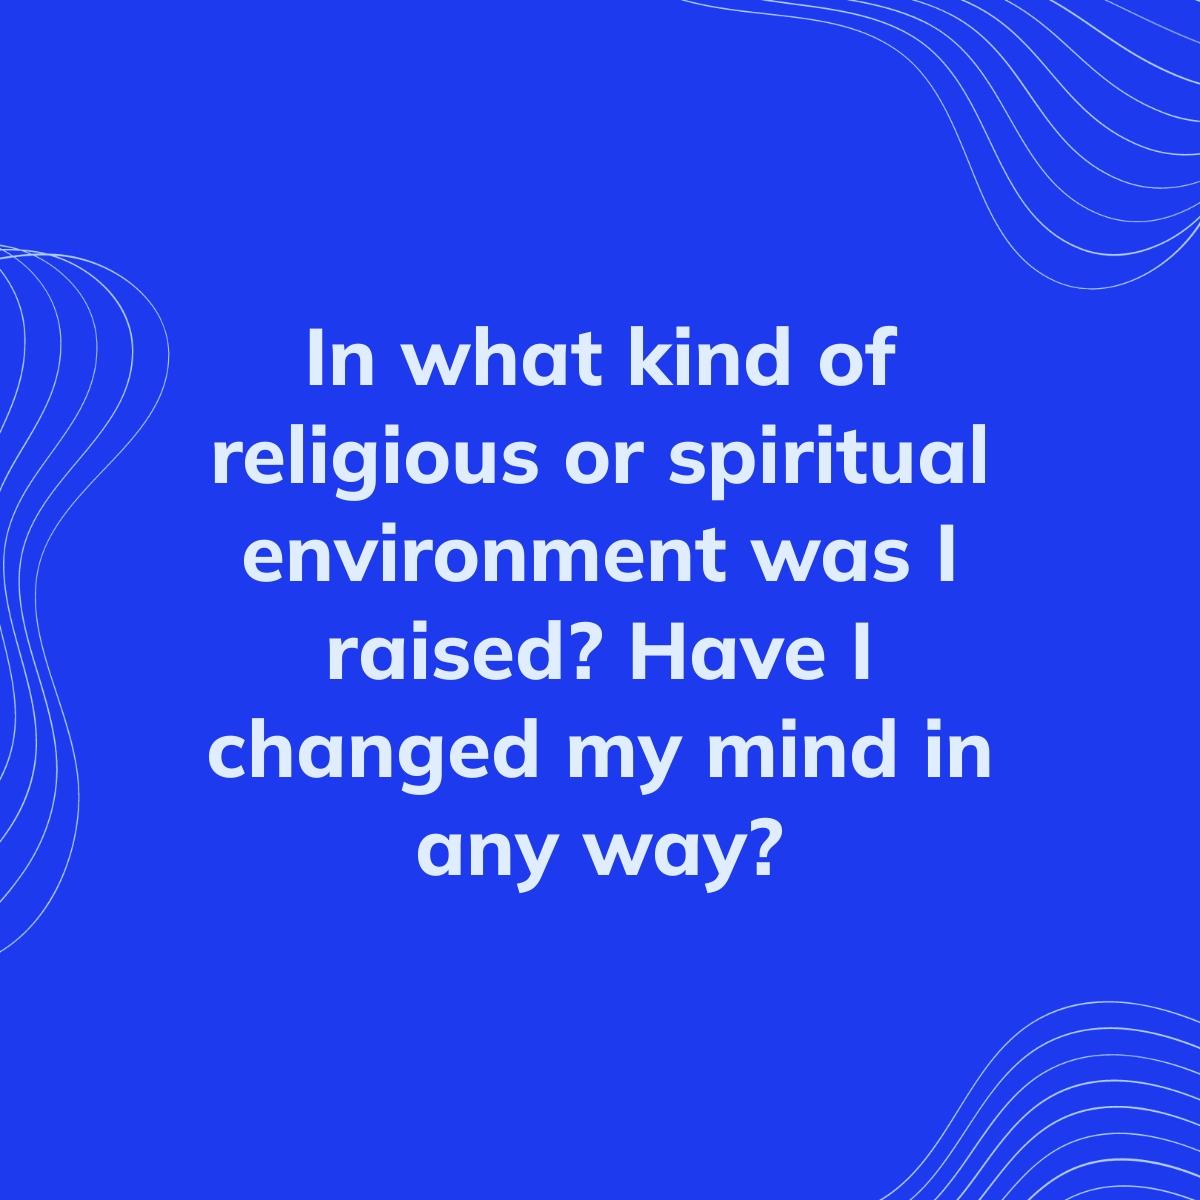 Journal Prompt: In what kind of religious or spiritual environment was I raised? Have I changed my mind in any way?